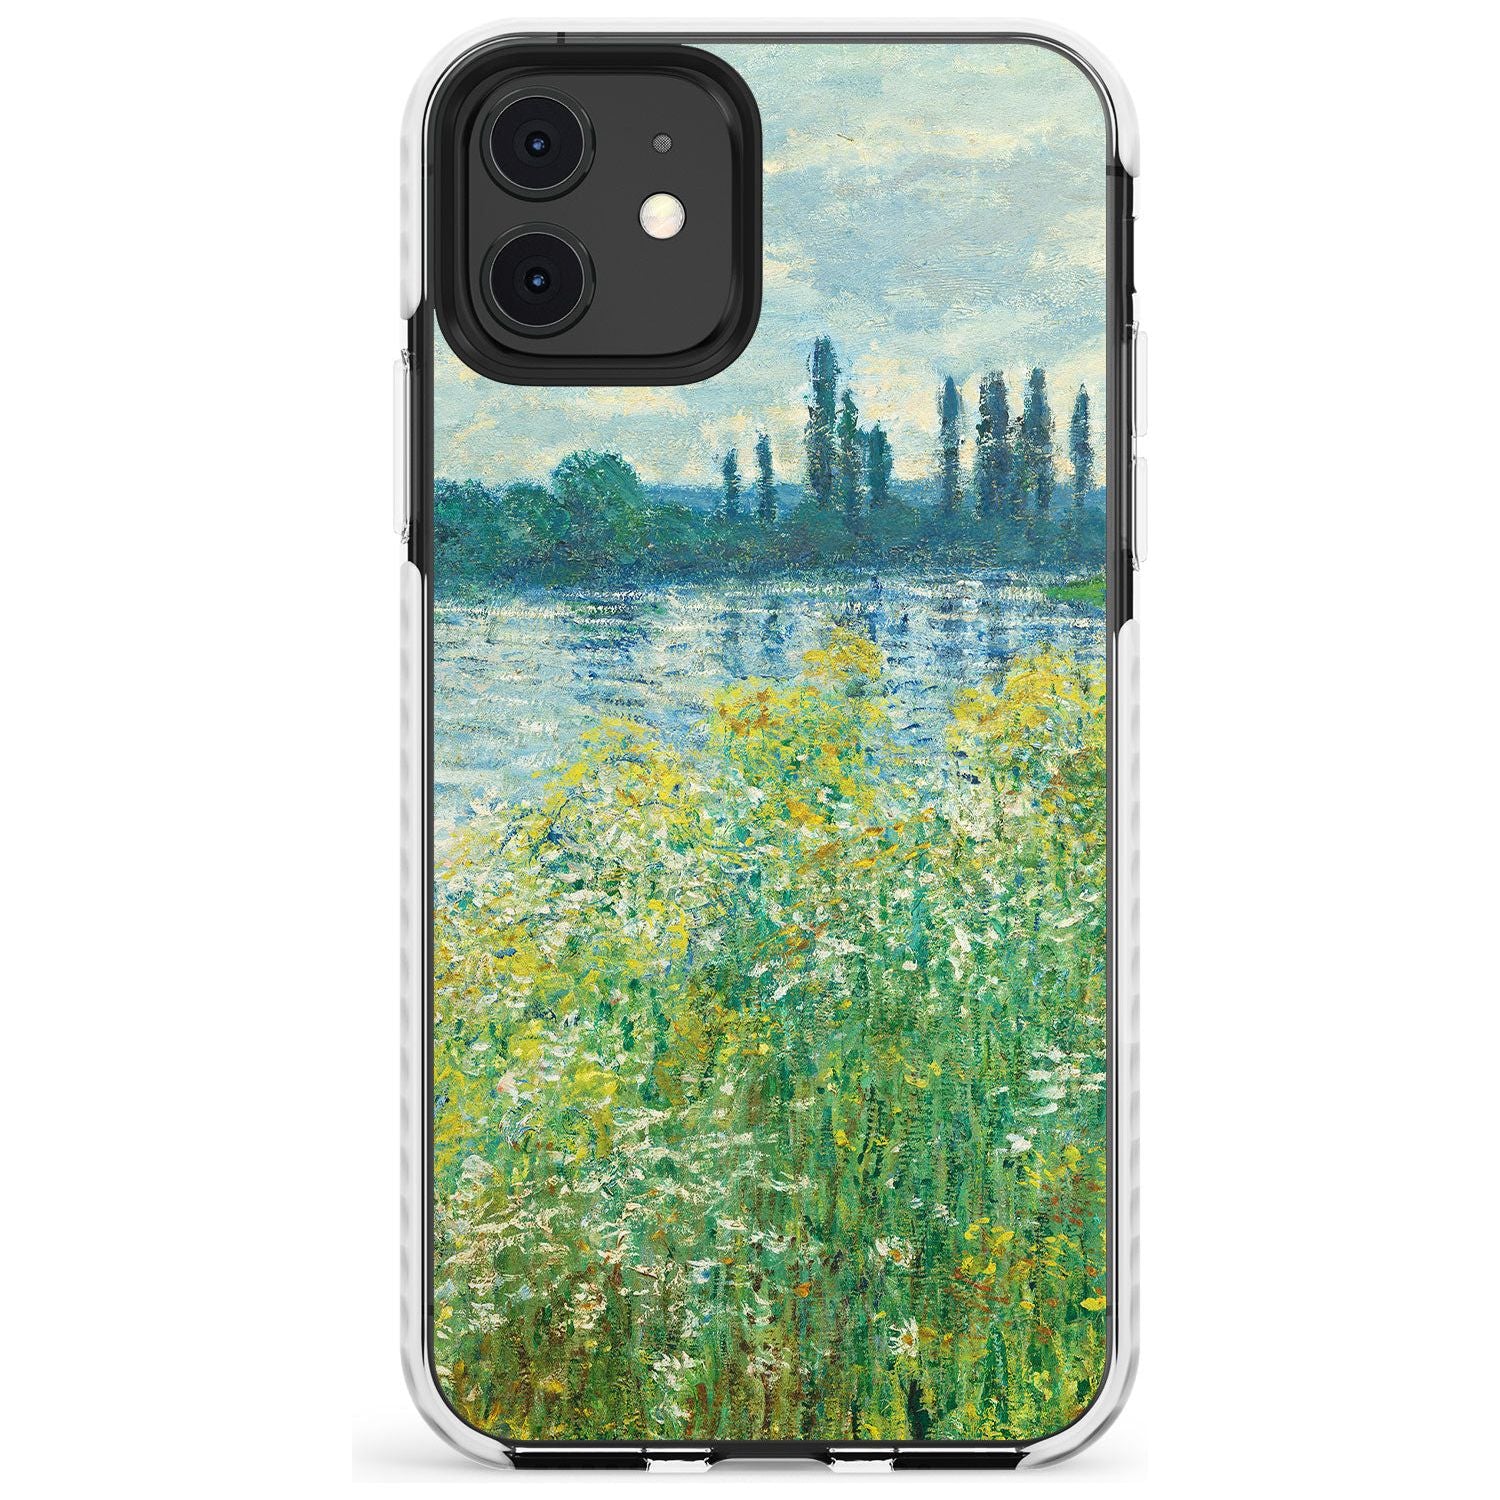 Banks of the Seine by Claude Monet Slim TPU Phone Case for iPhone 11